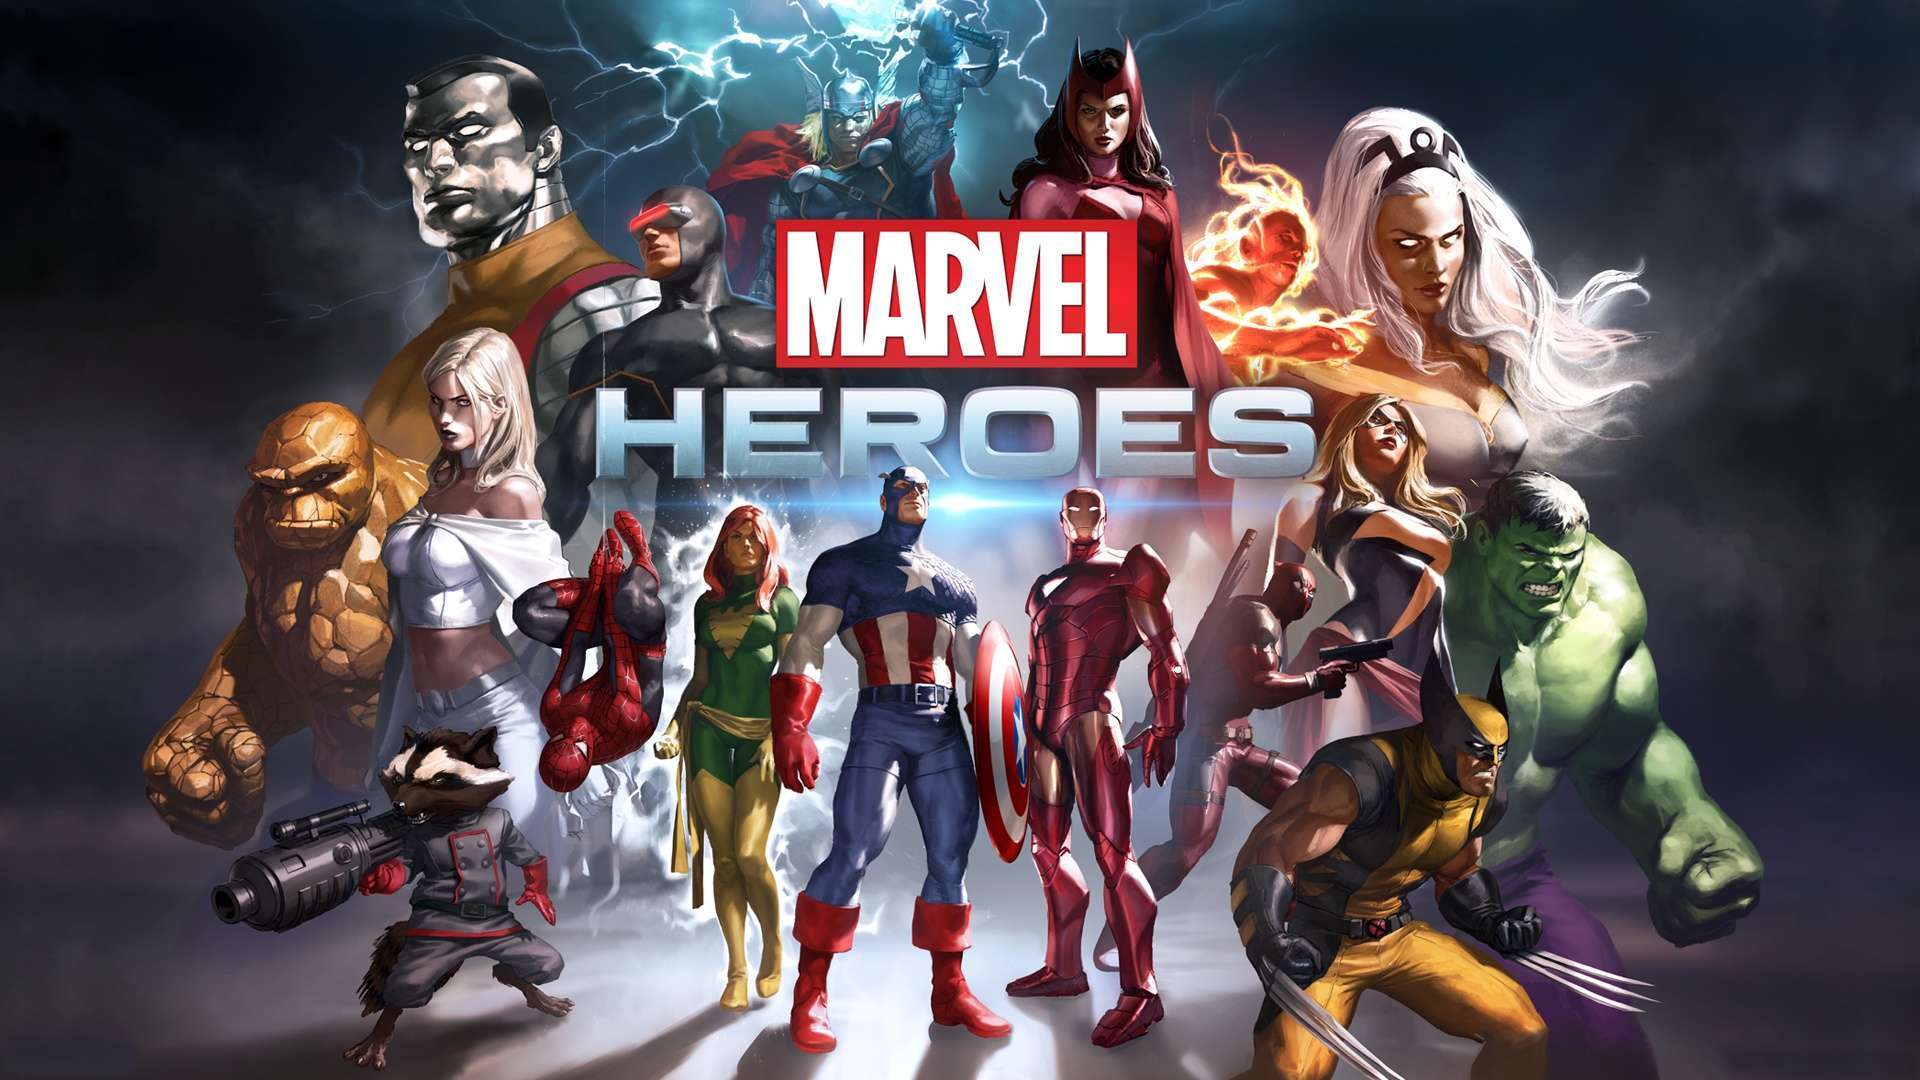 Wallpaper Marvel Heroes Game HD 1080p Upload At March